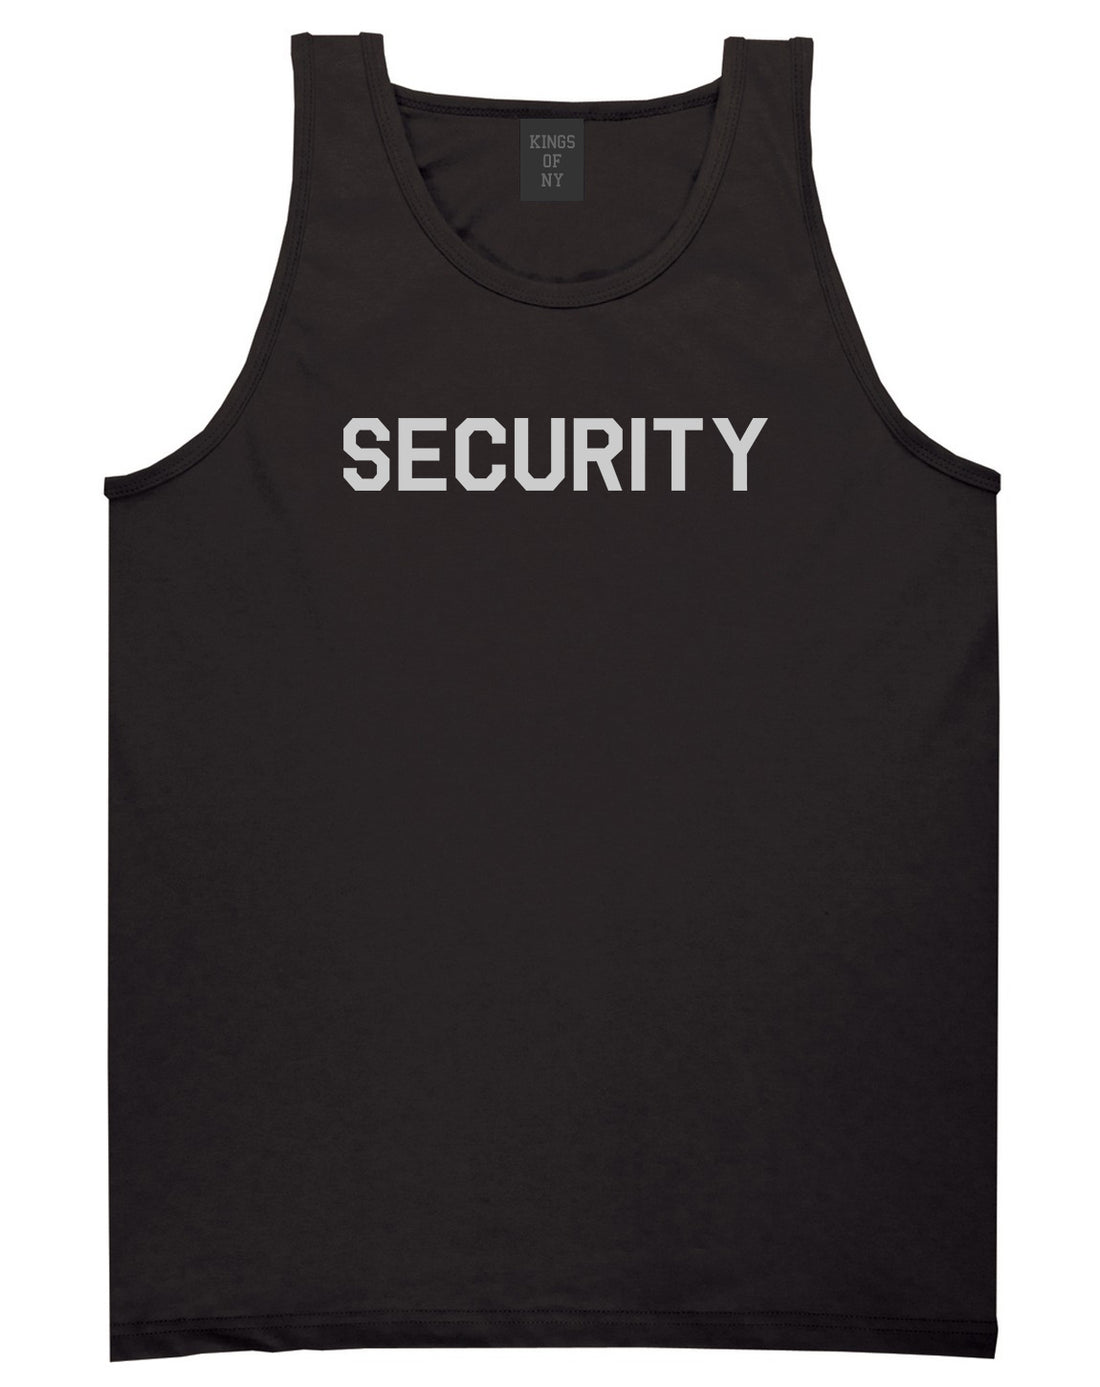 Event Security Uniform Mens Black Tank Top Shirt by KINGS OF NY